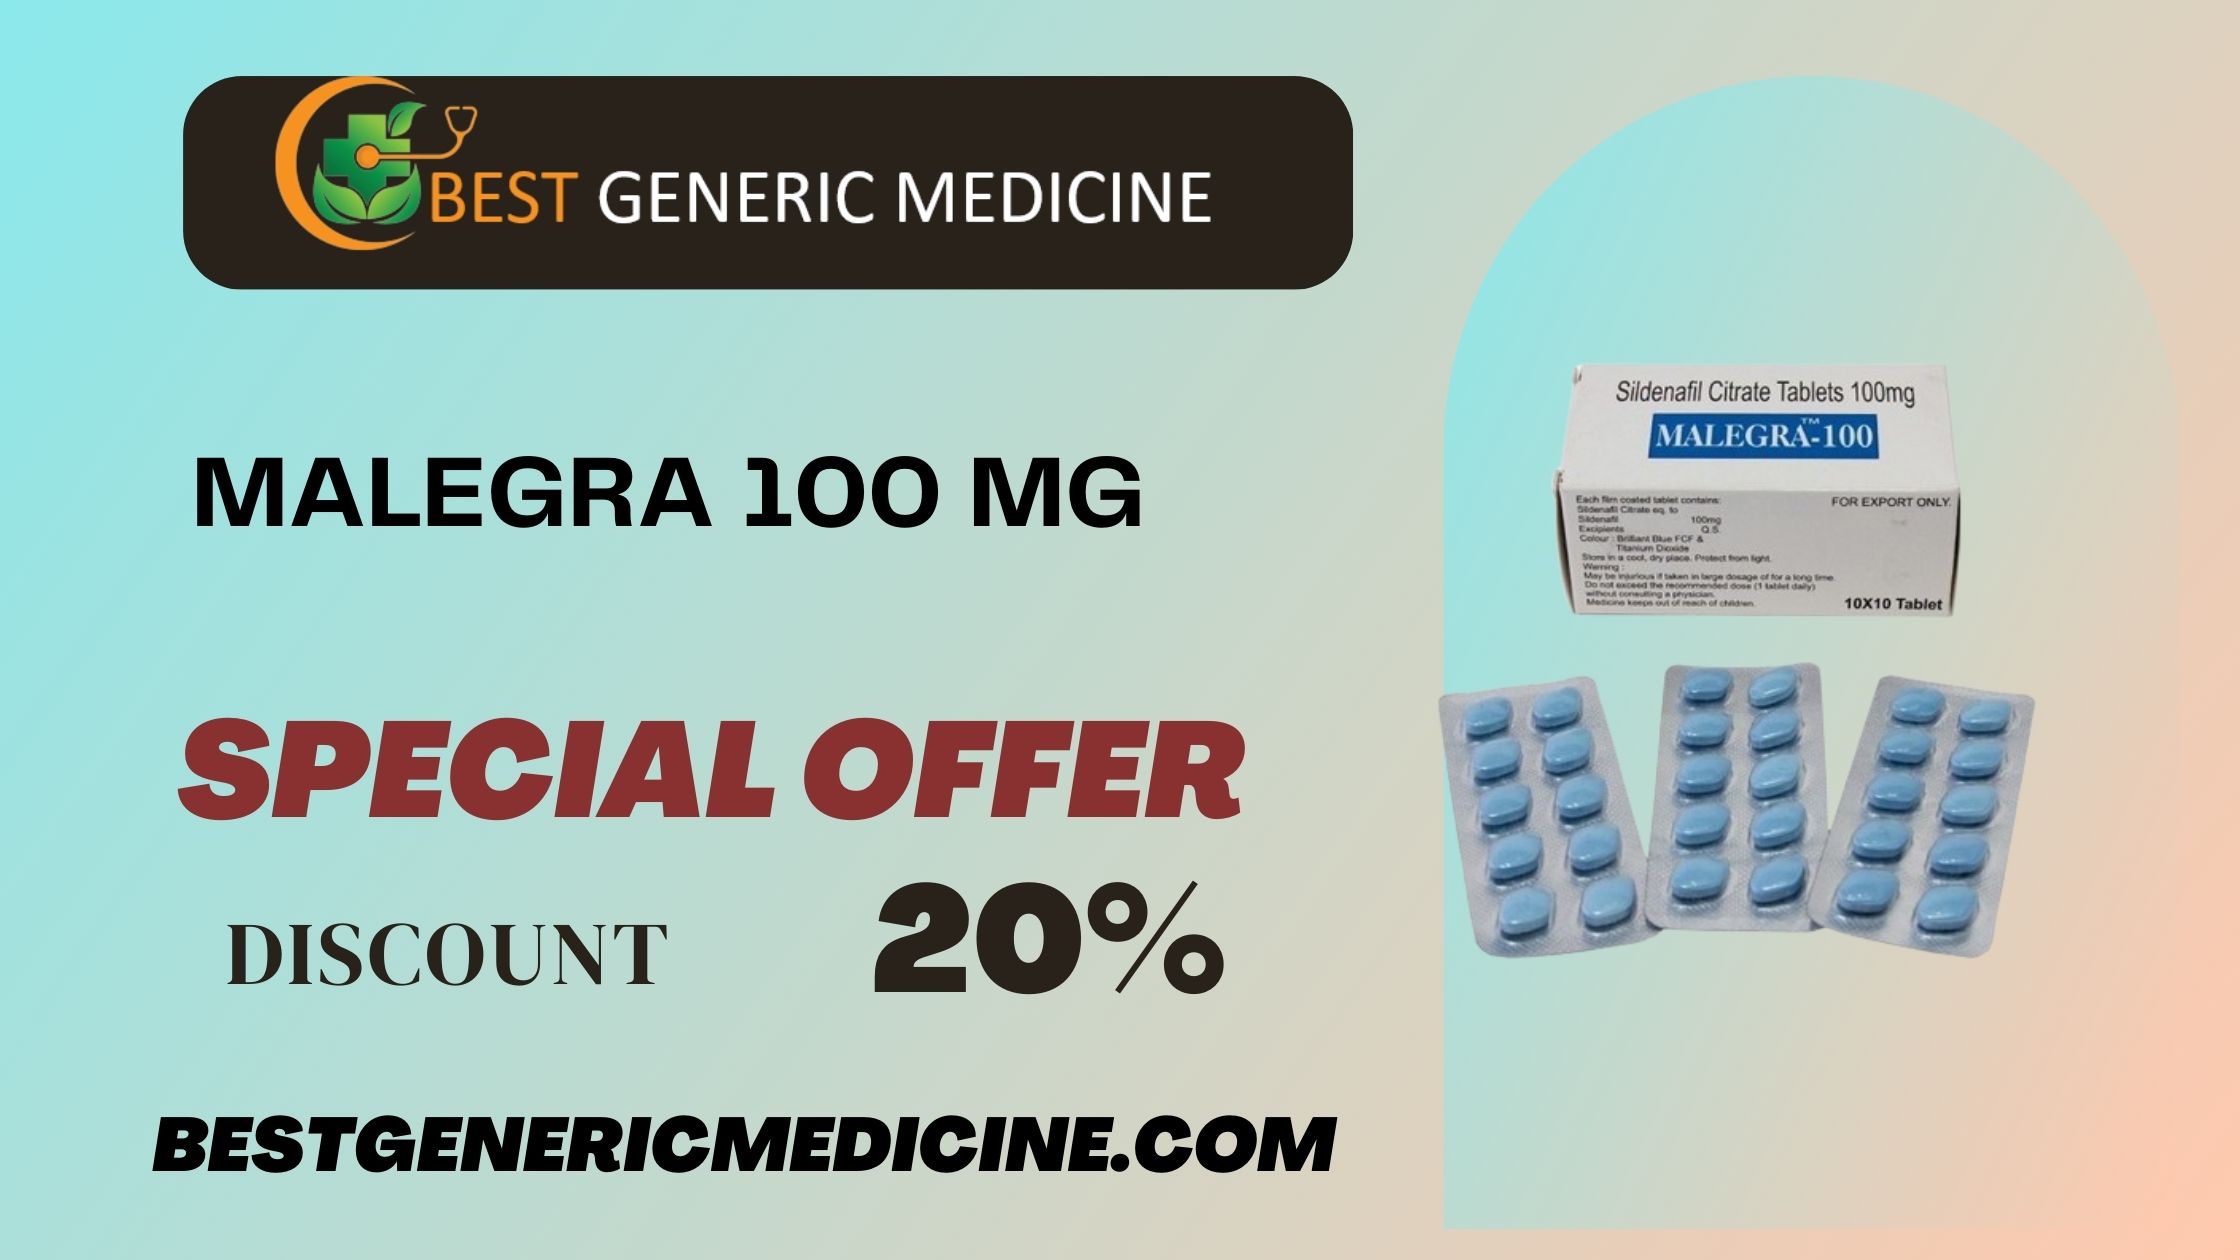 as

eRe AN 2 [eI] [eS

 

Sildenafil Citrate Tablets 100mg
MALEGRA-100

SPECIAL OFFER ae S25
LEE oy a
ow -
ol YY

piscount 20%

BESTGENERICMEDICINE.COM